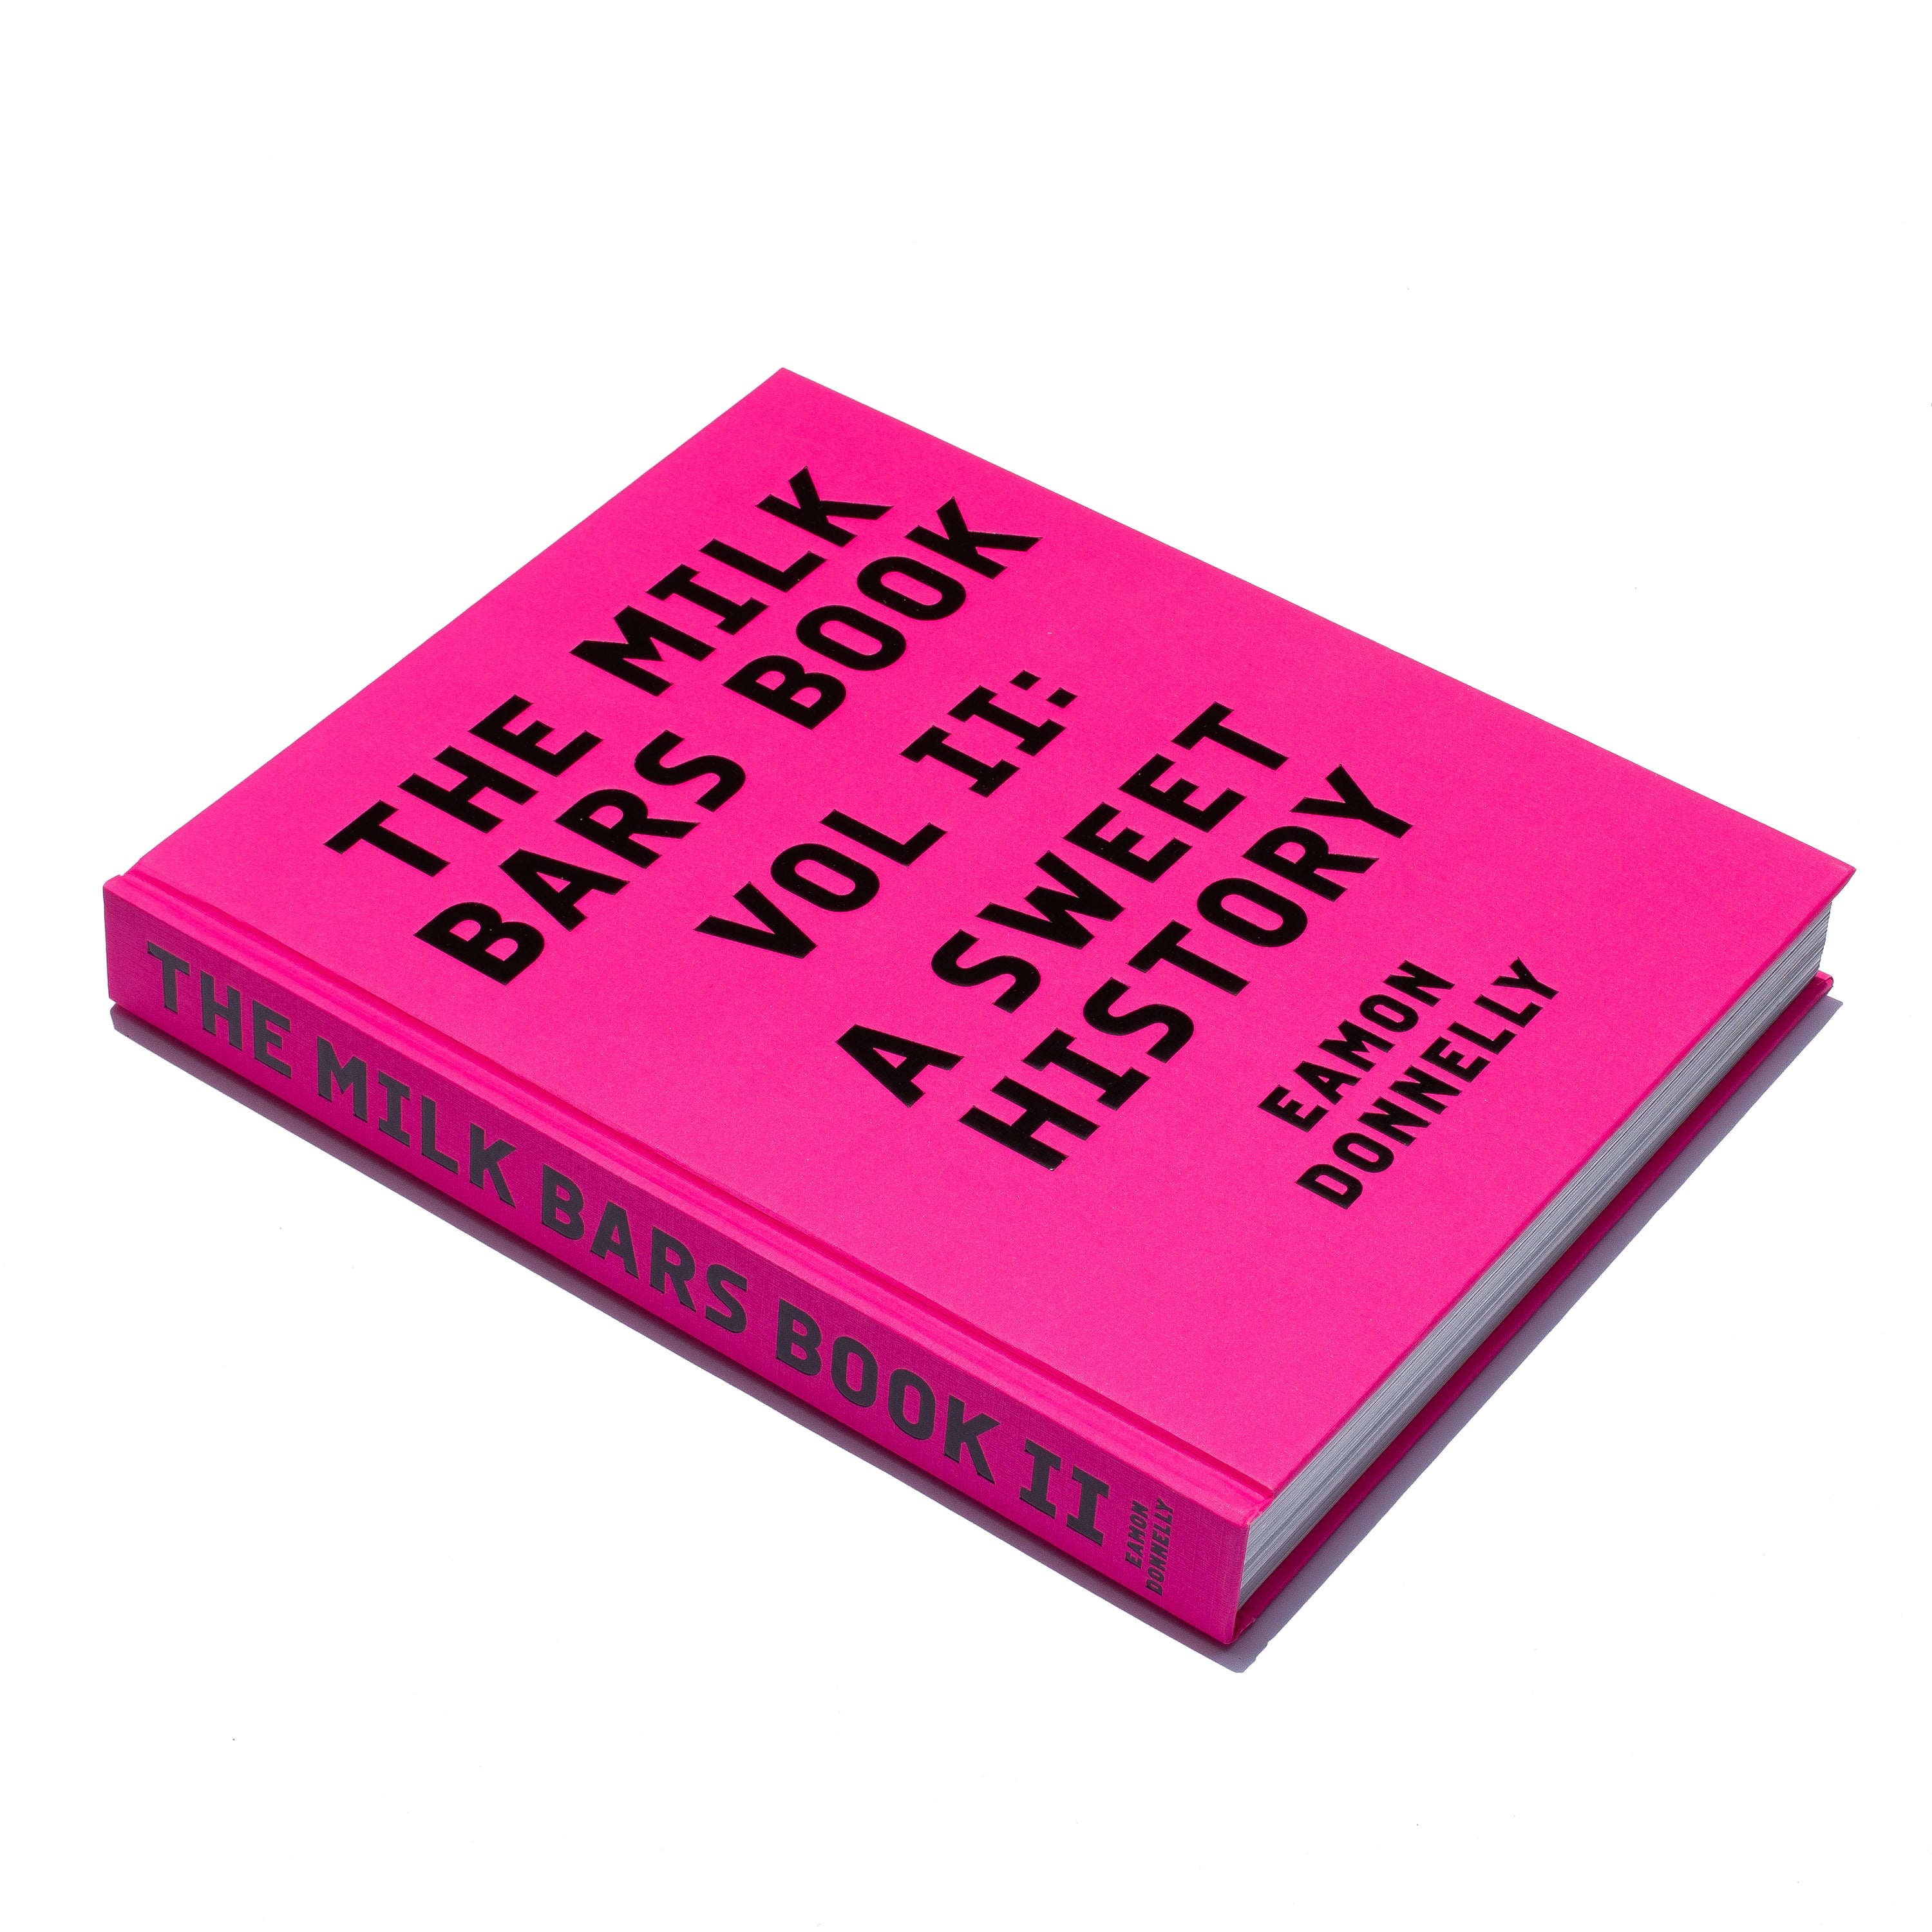 DISCOUNTED SECONDS STOCK of The Milk Bars Book. Volume II: A Sweet History [2023] — minor factory / carton damage, smudge, defect or scuff on the cover, spine, internal pages or end papers, otherwise “as new”